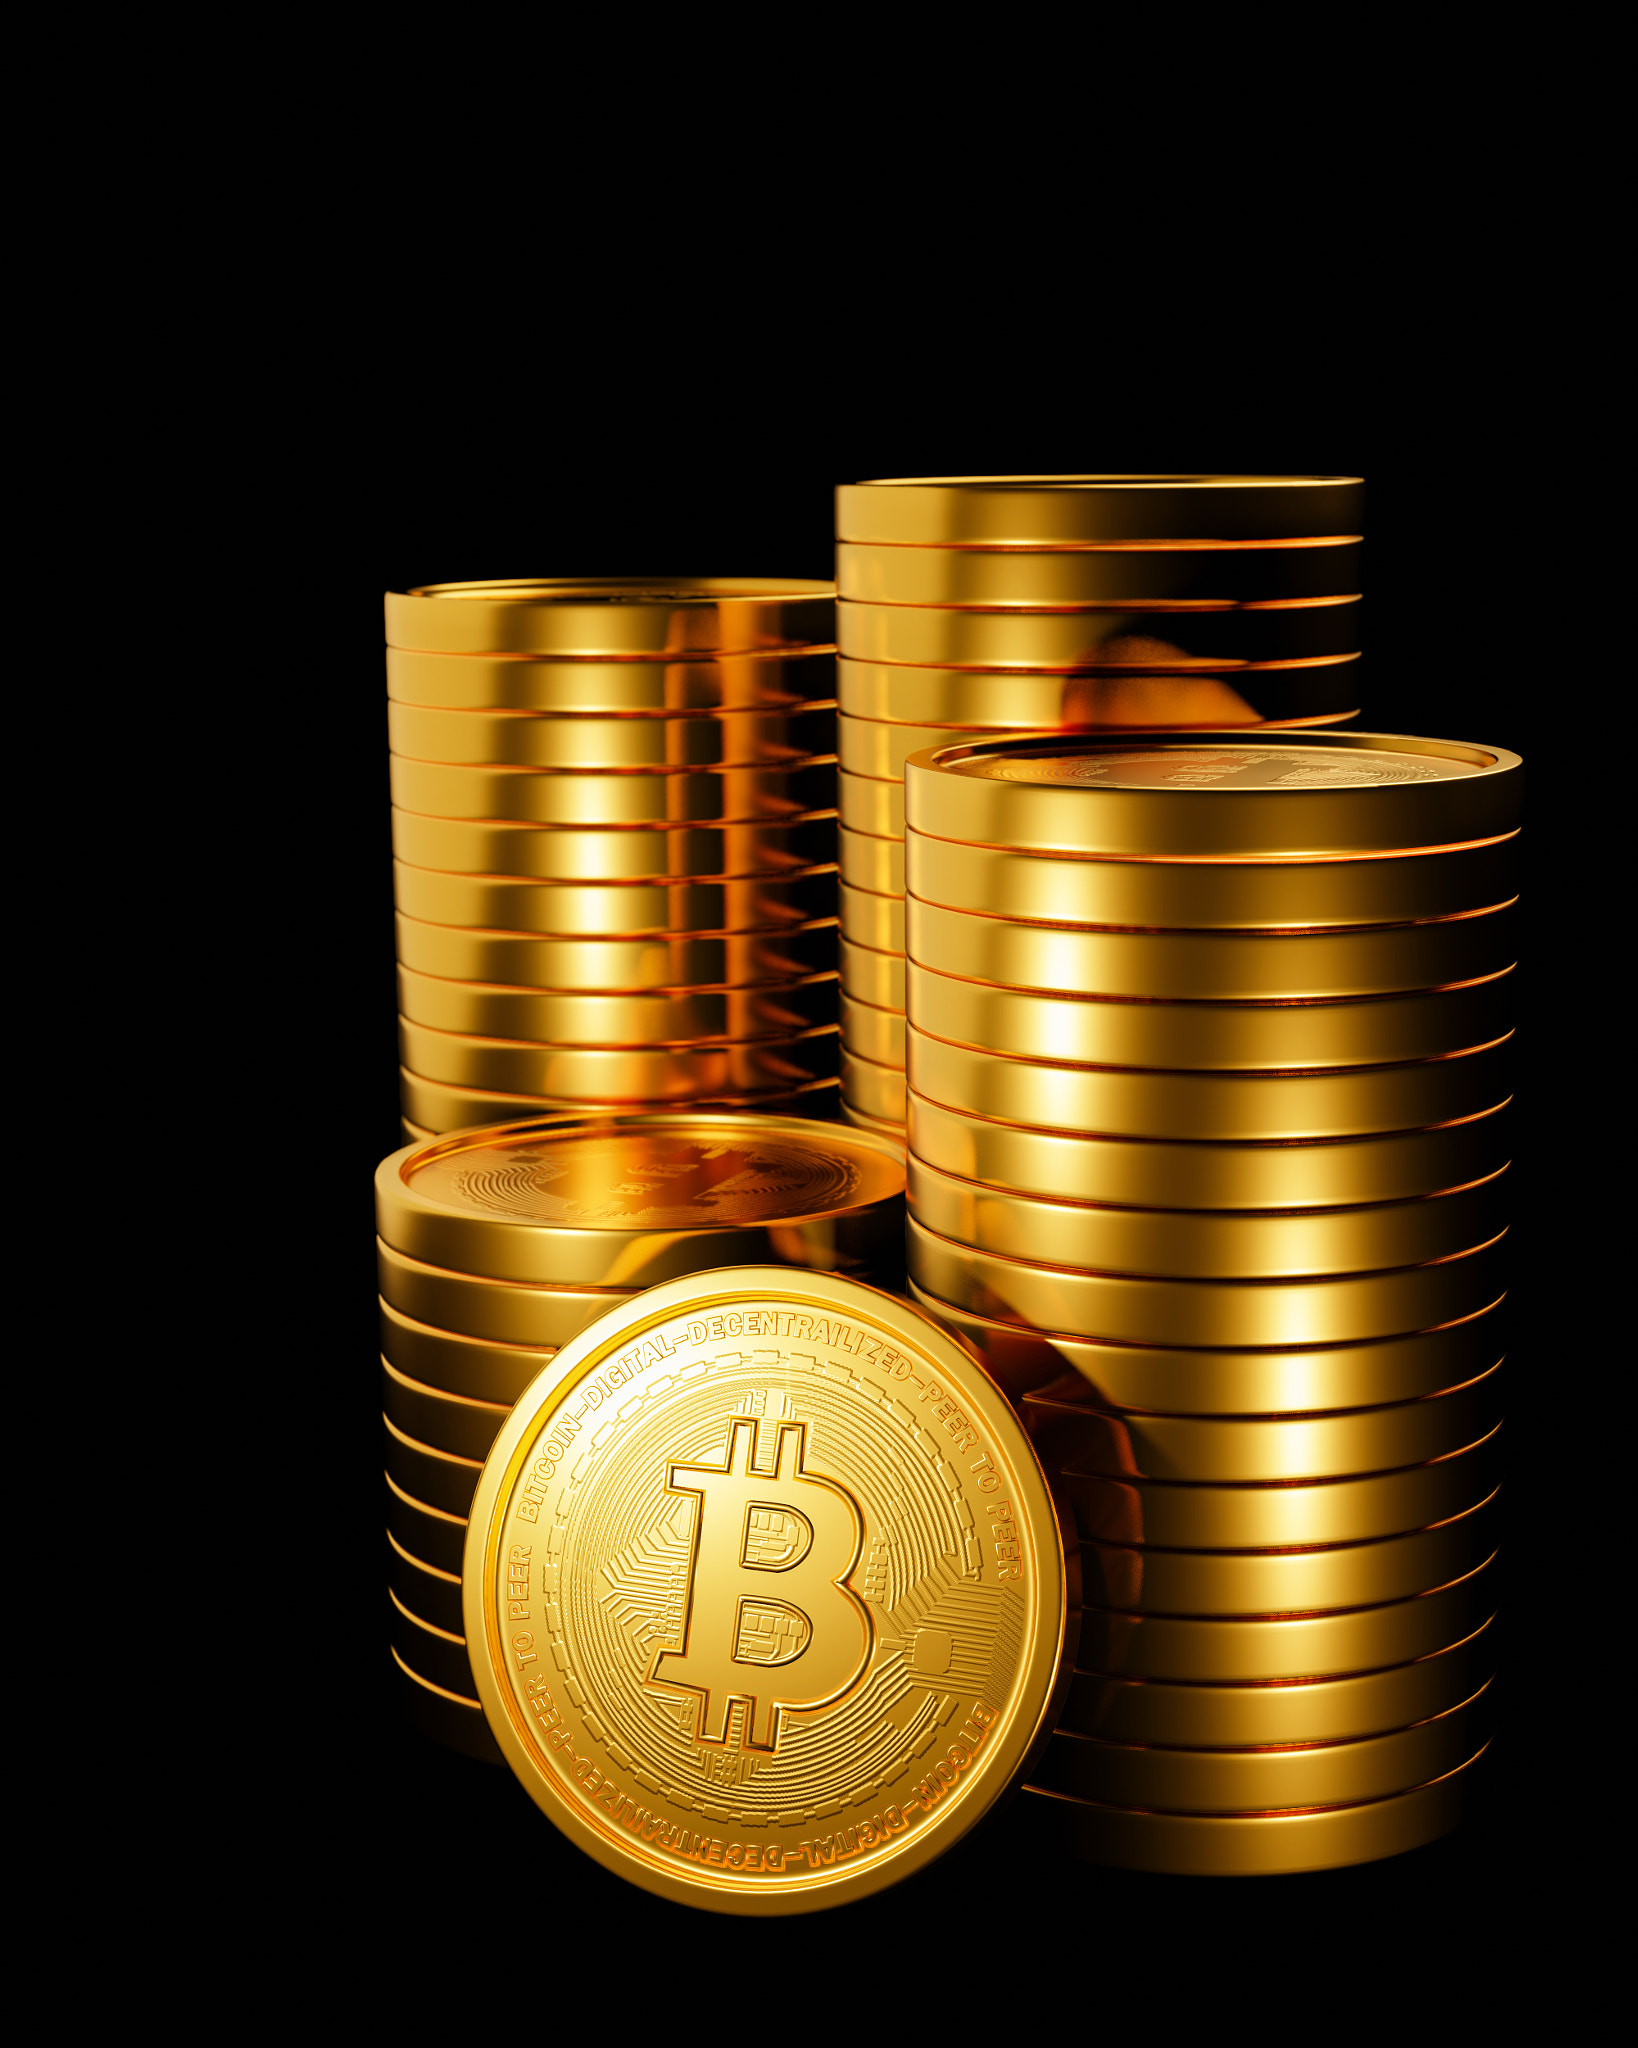 The gold coin has a bitcoin symbol. cryptocurrency The coin format is stacked on a black background.